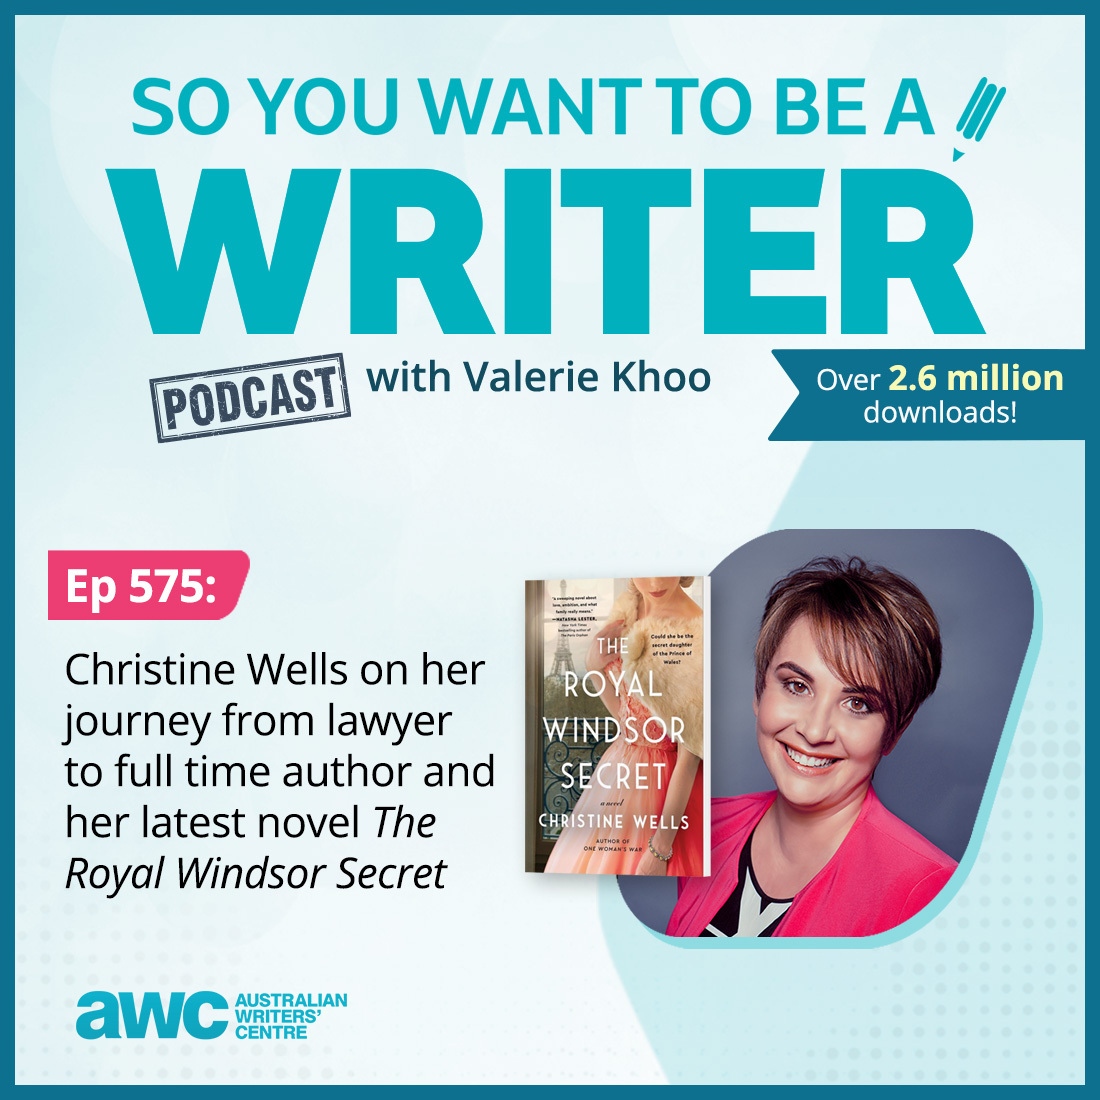 Christine Wells (@christinewells0) on her journey from lawyer to full time author and her latest novel 'The Royal Windsor Secret' (@harpercollinsau). Listen to episode 575 on your favourite podcast app, or here: writerscentre.com.au/blog/ep-575/